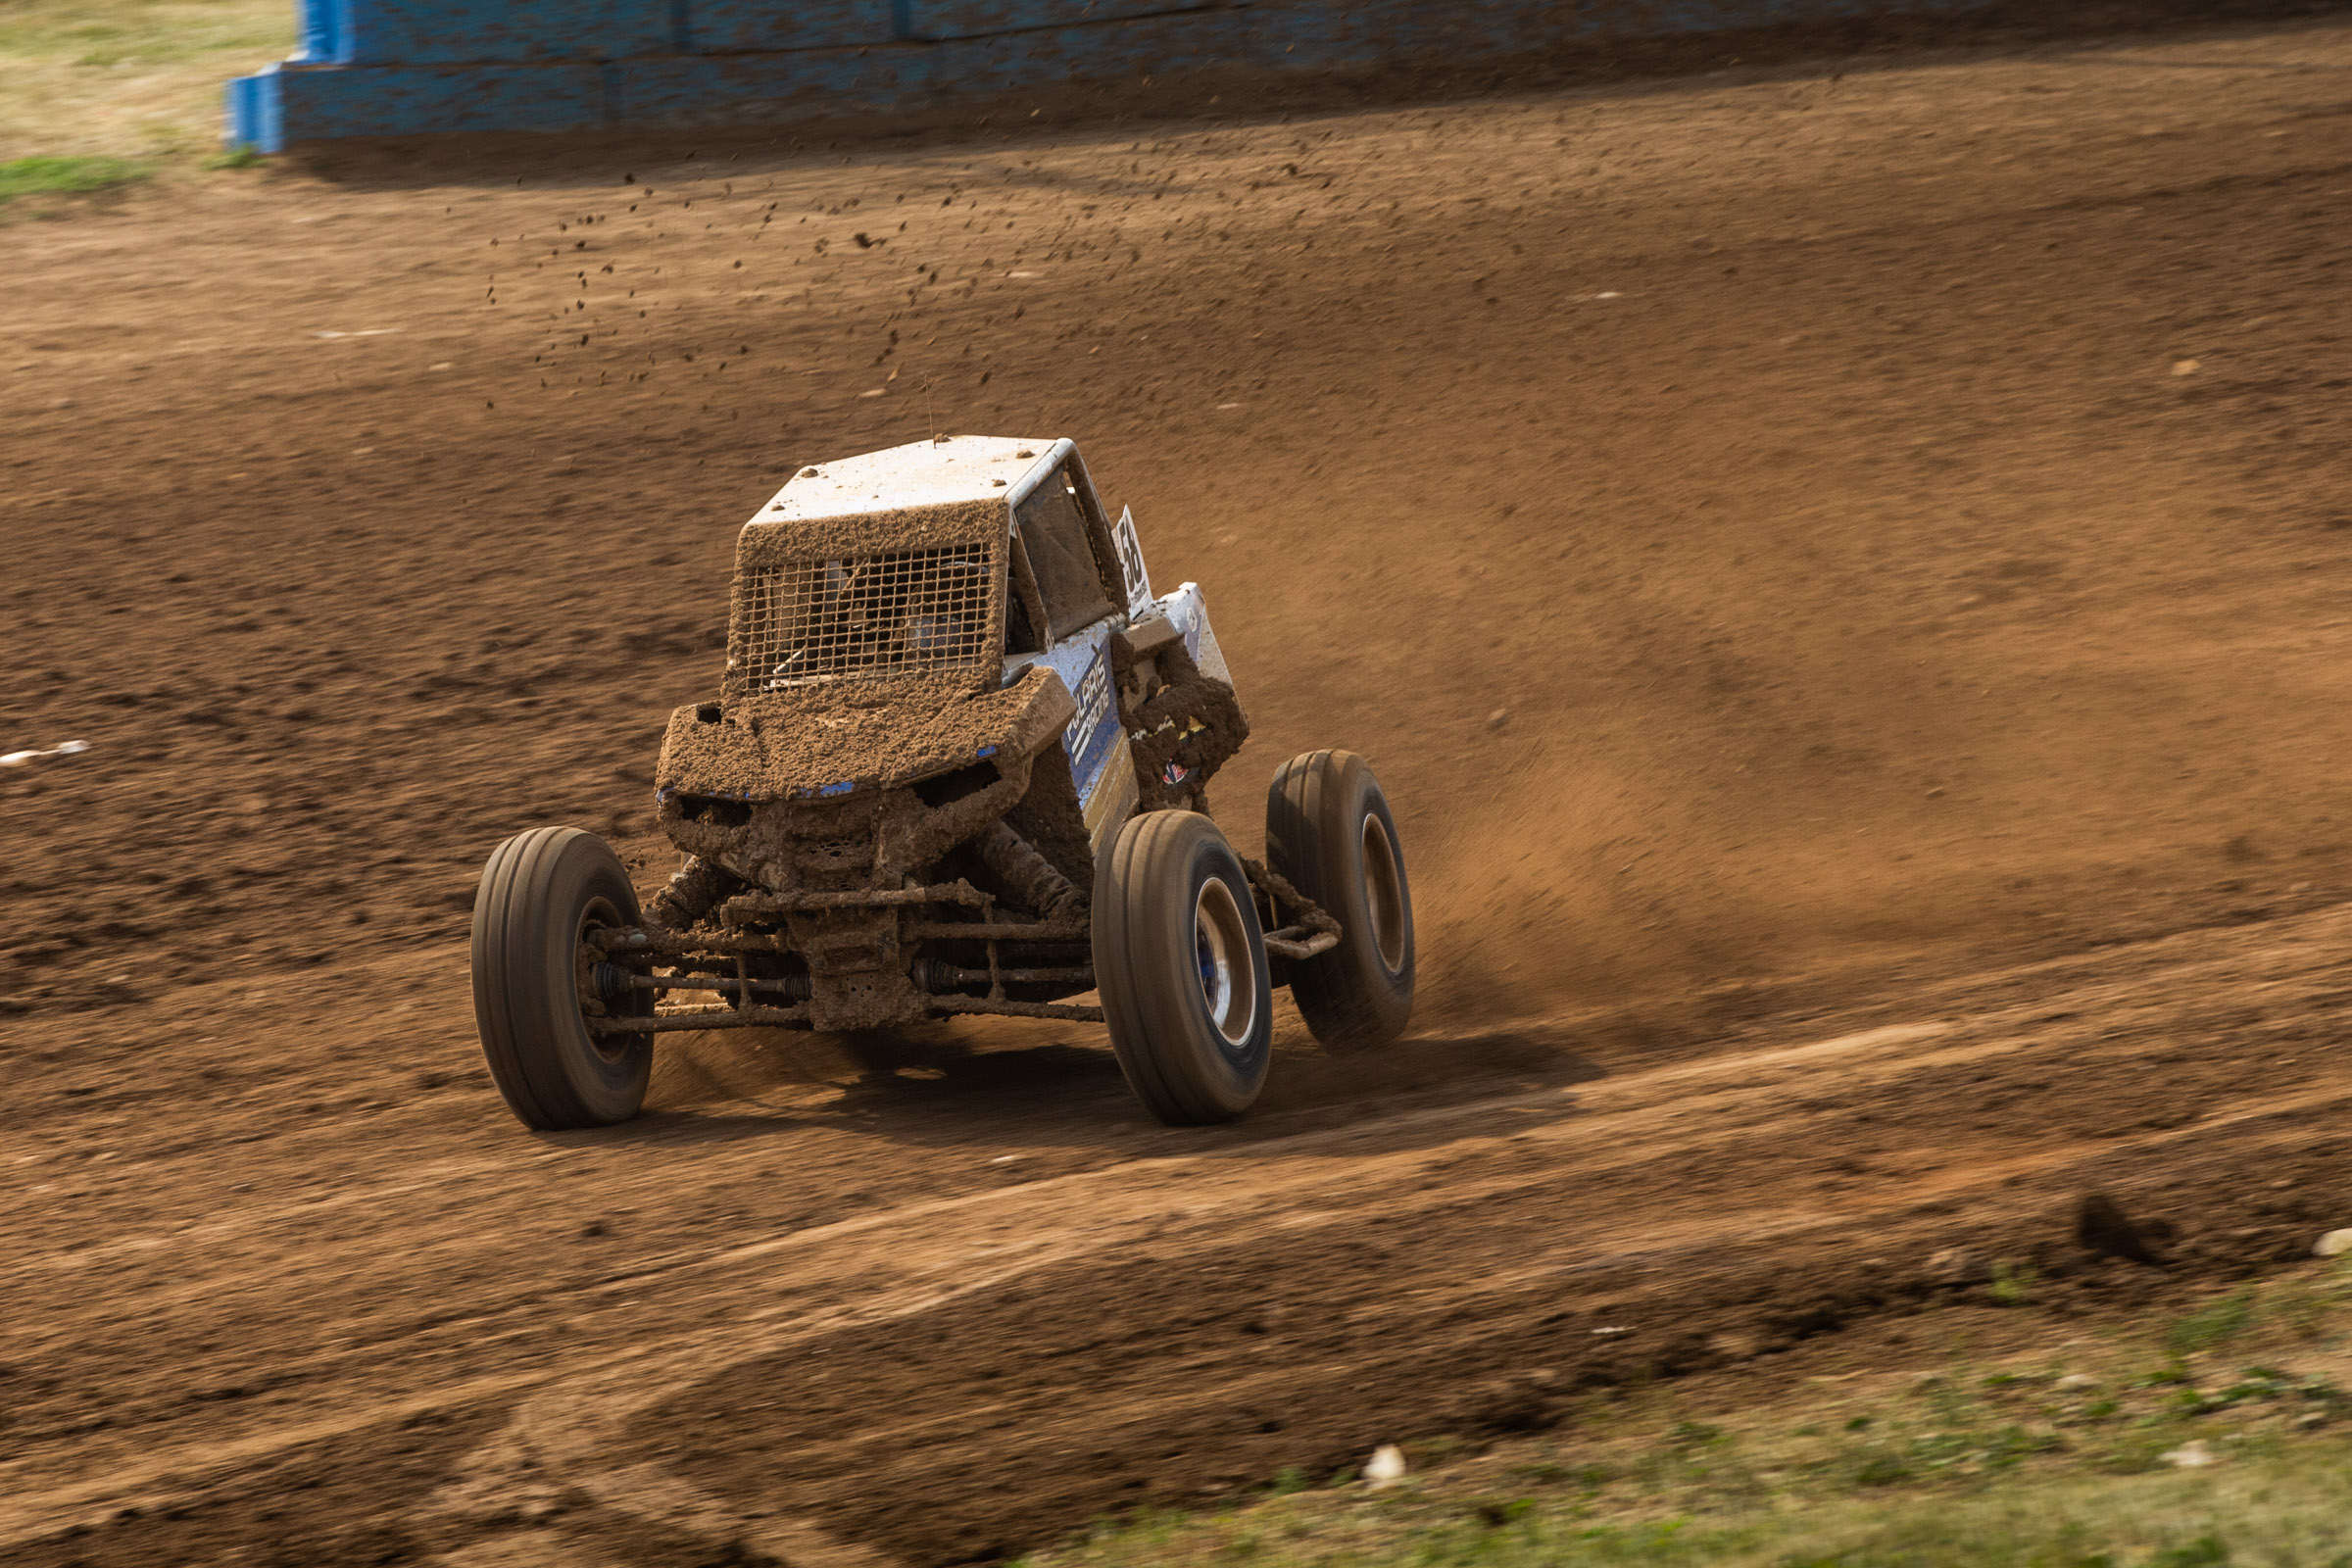 SxS racing on a dirt track.